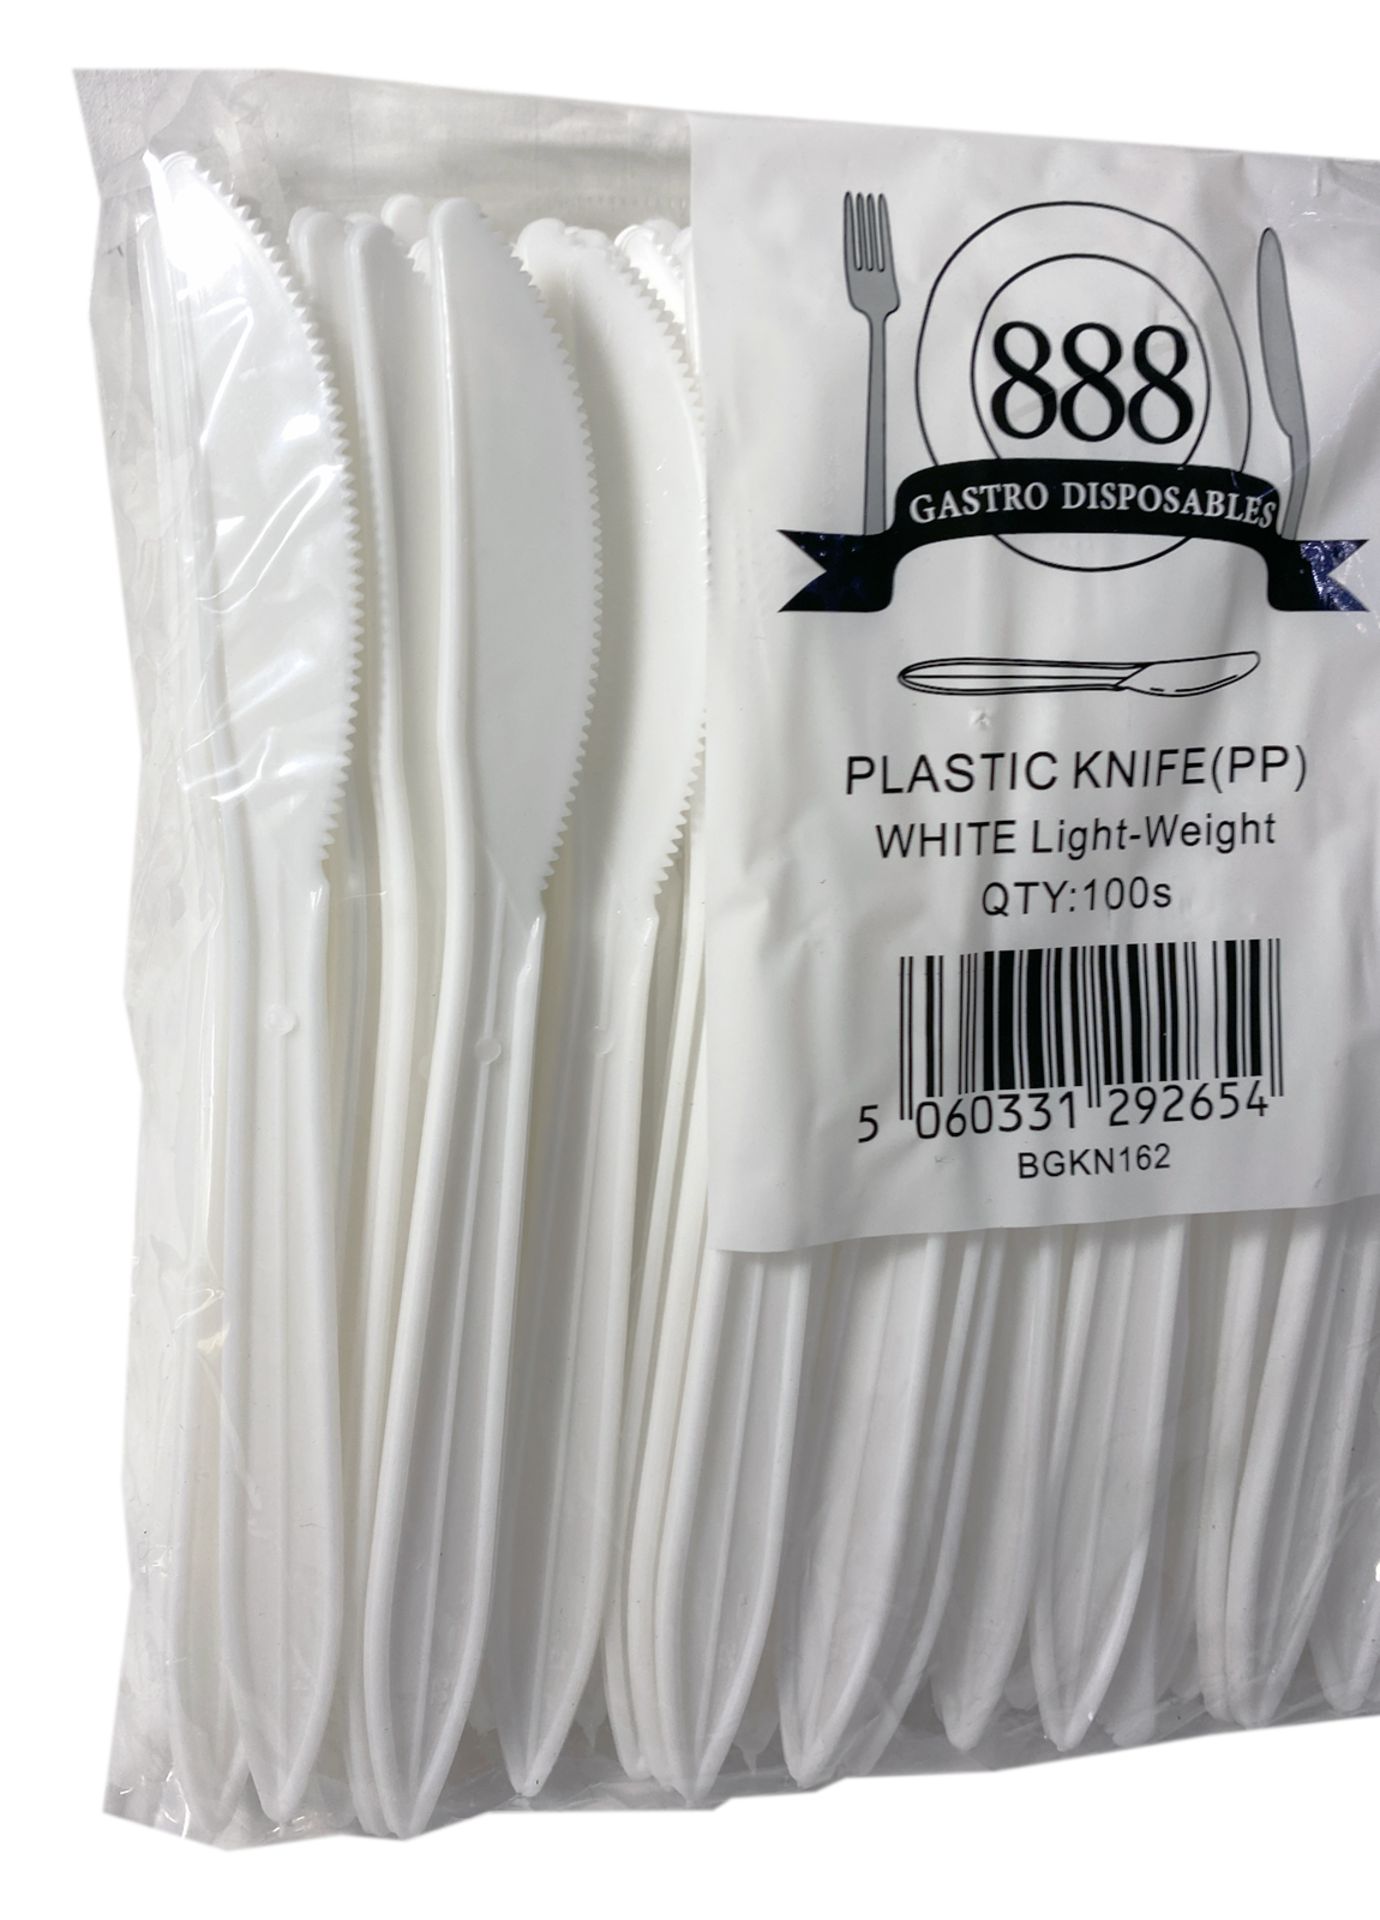 5 x Boxes of 1000 Plastic Knives by 888 Gastro Disposables - Image 2 of 3